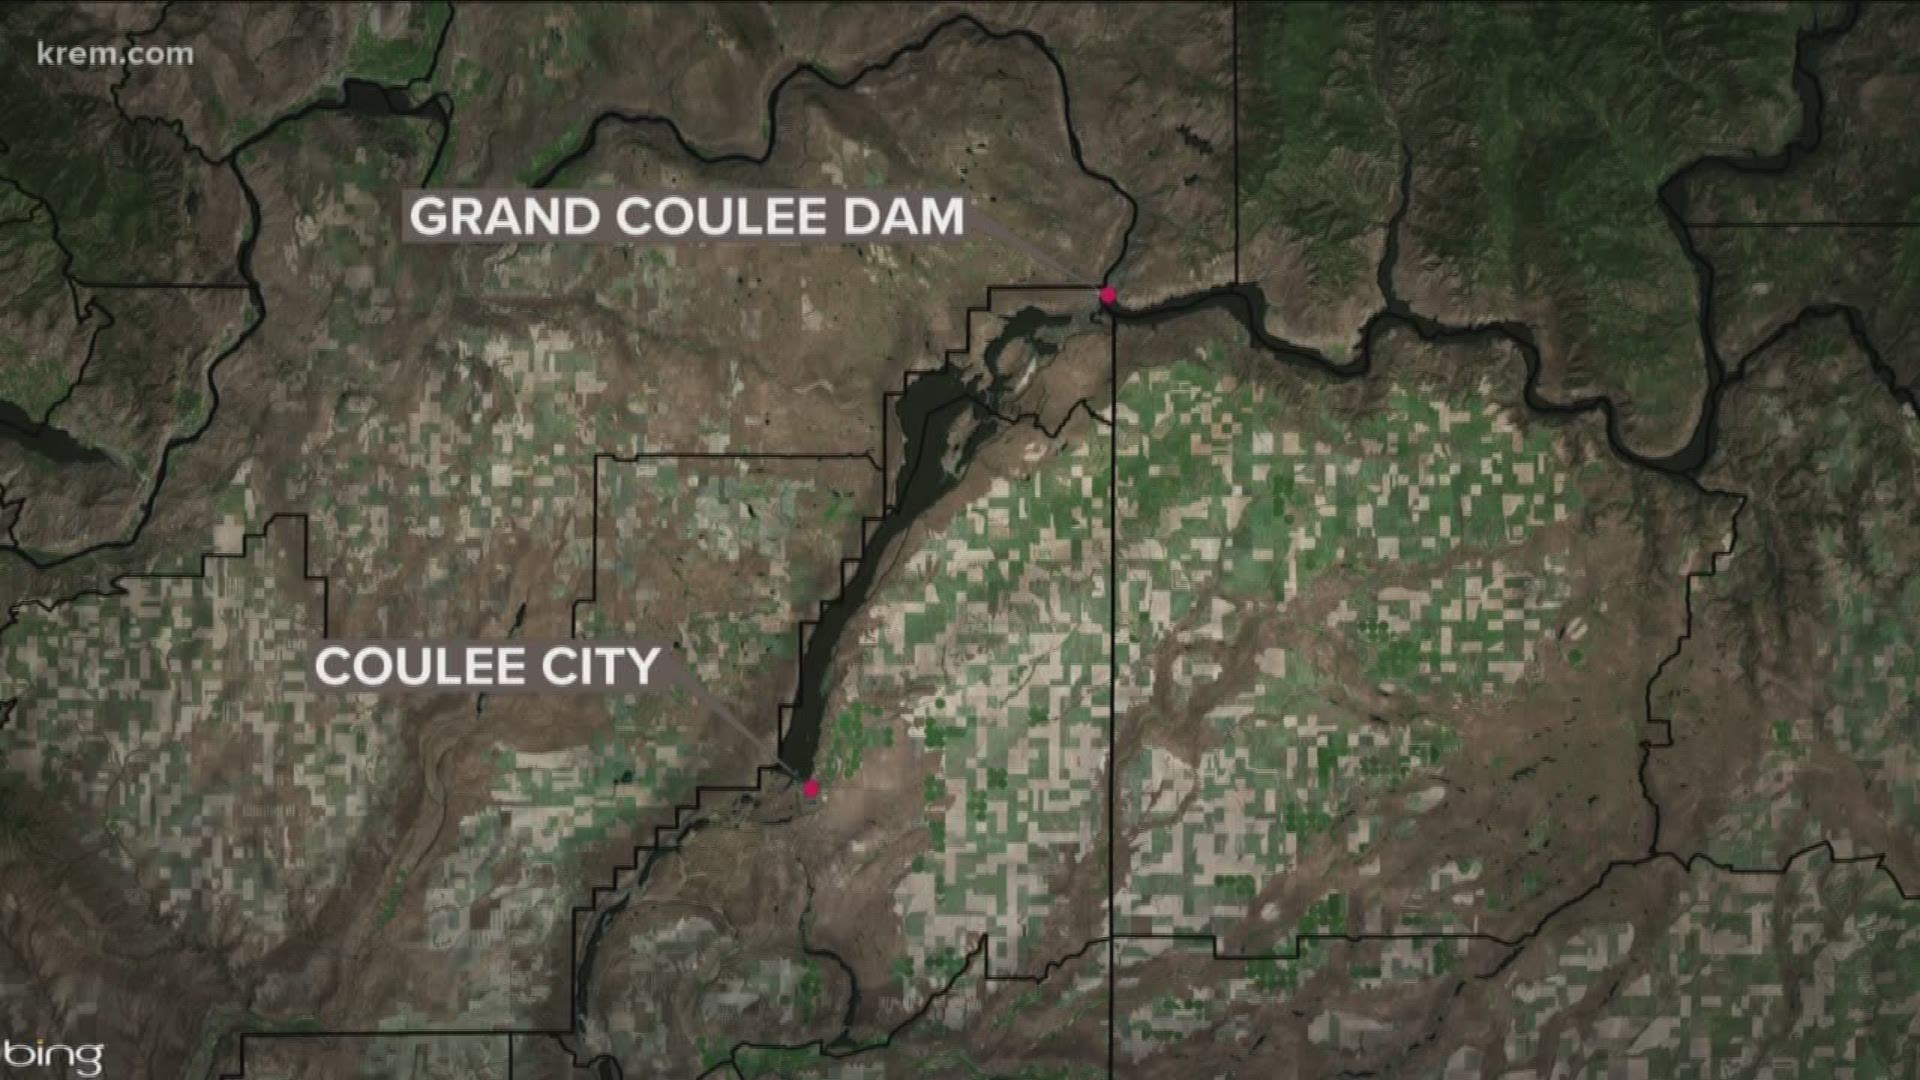 The epicenter was about 15 miles away from Coulee City. There have been no reports of damage from the earthquake.